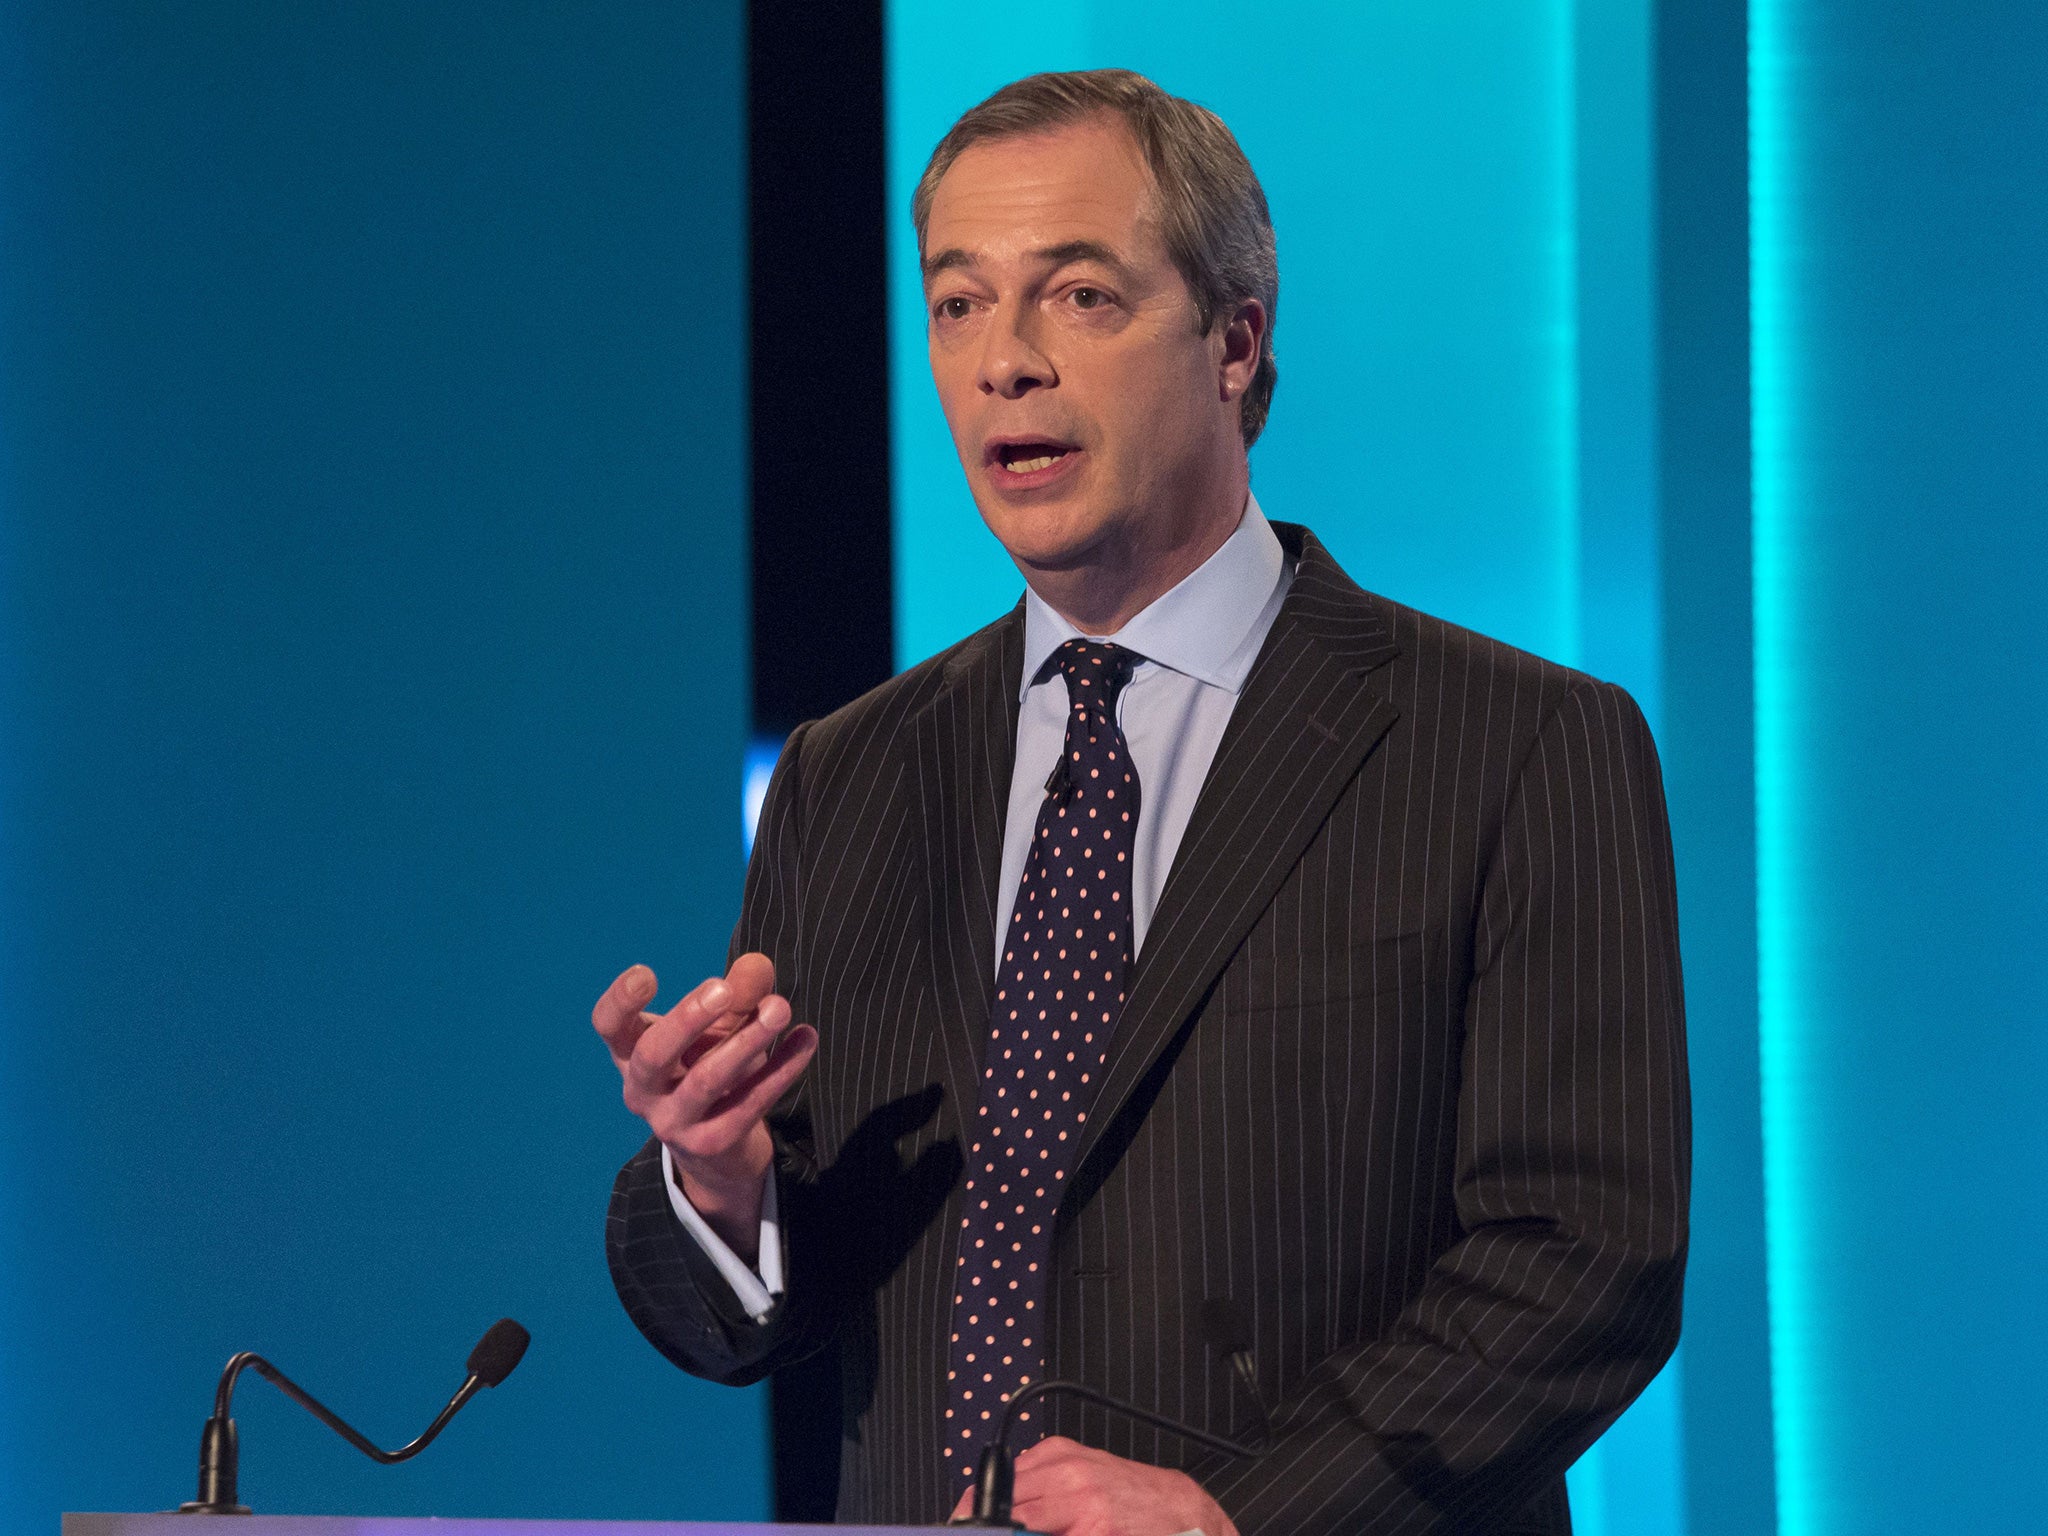 Nigel Farage claimed that 60% of HIV cases diagnosed in the UK were not British-born